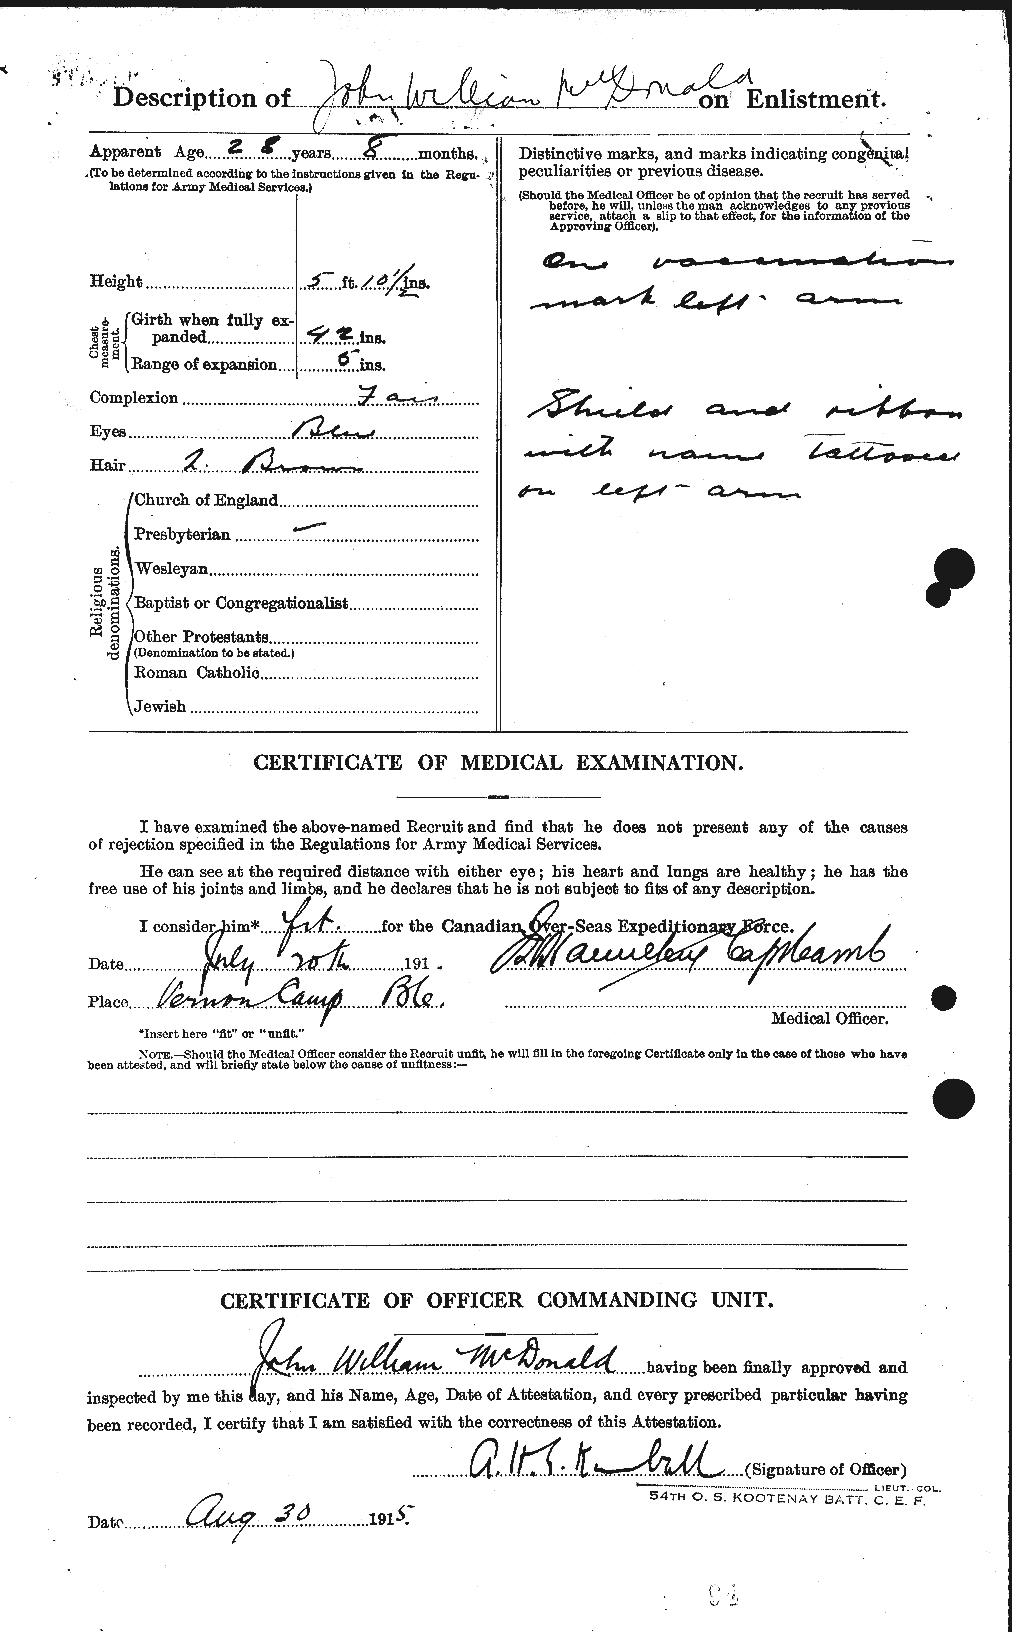 Personnel Records of the First World War - CEF 519615b